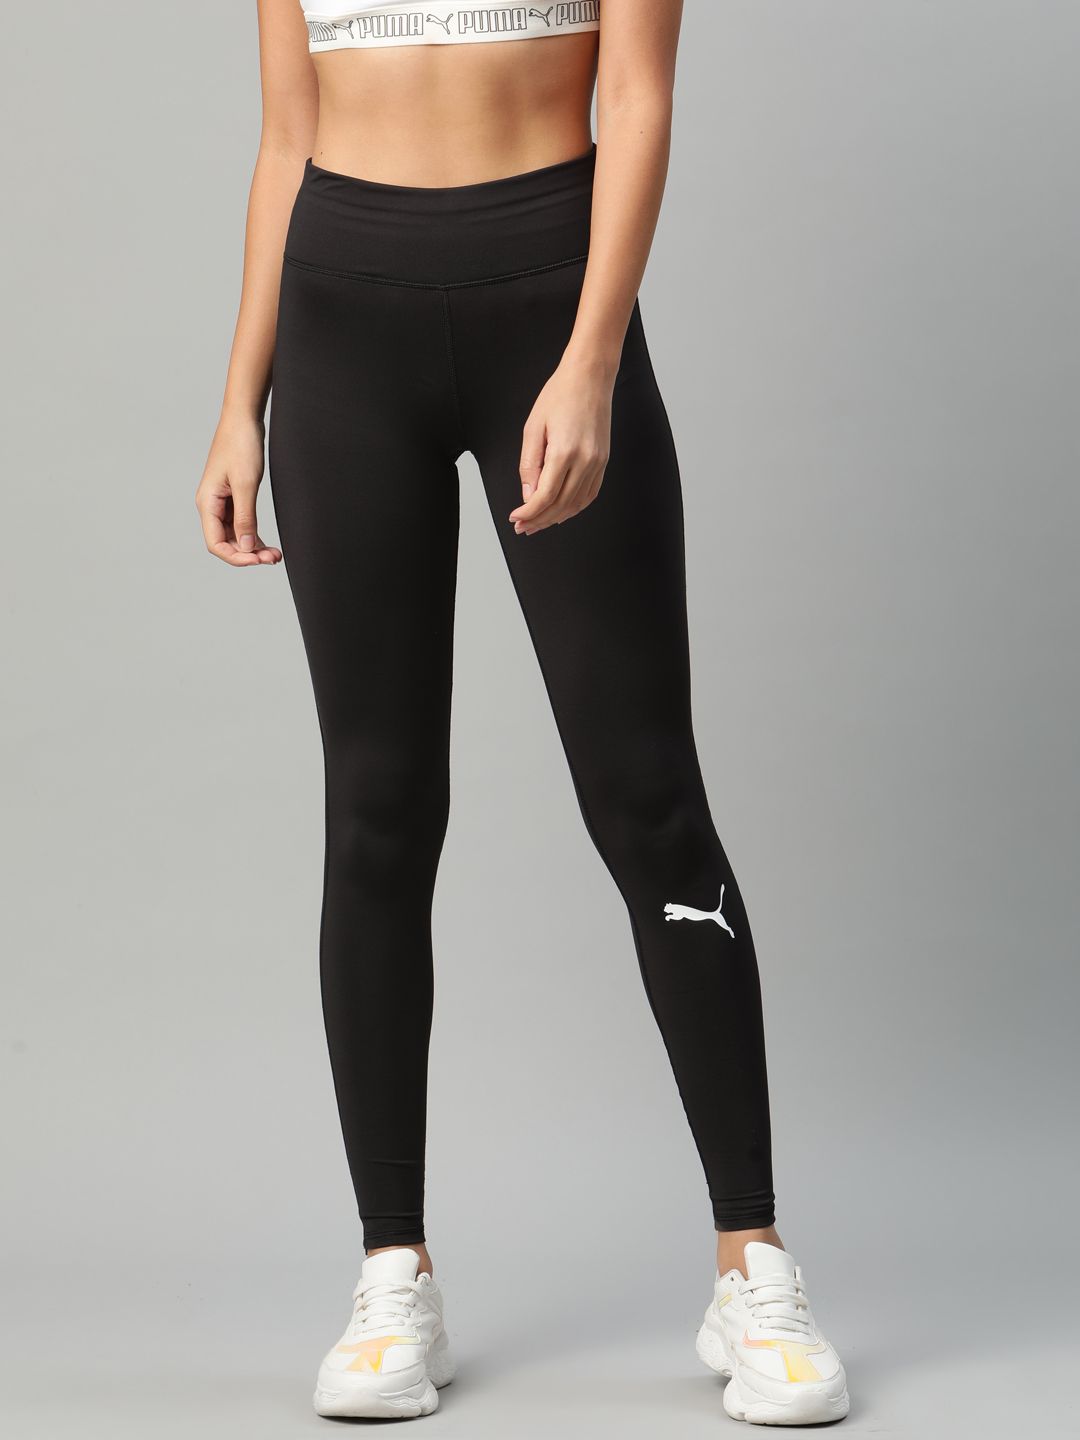 Puma Women Black Solid Cross The Line Full Length Track and Field Tights Price in India